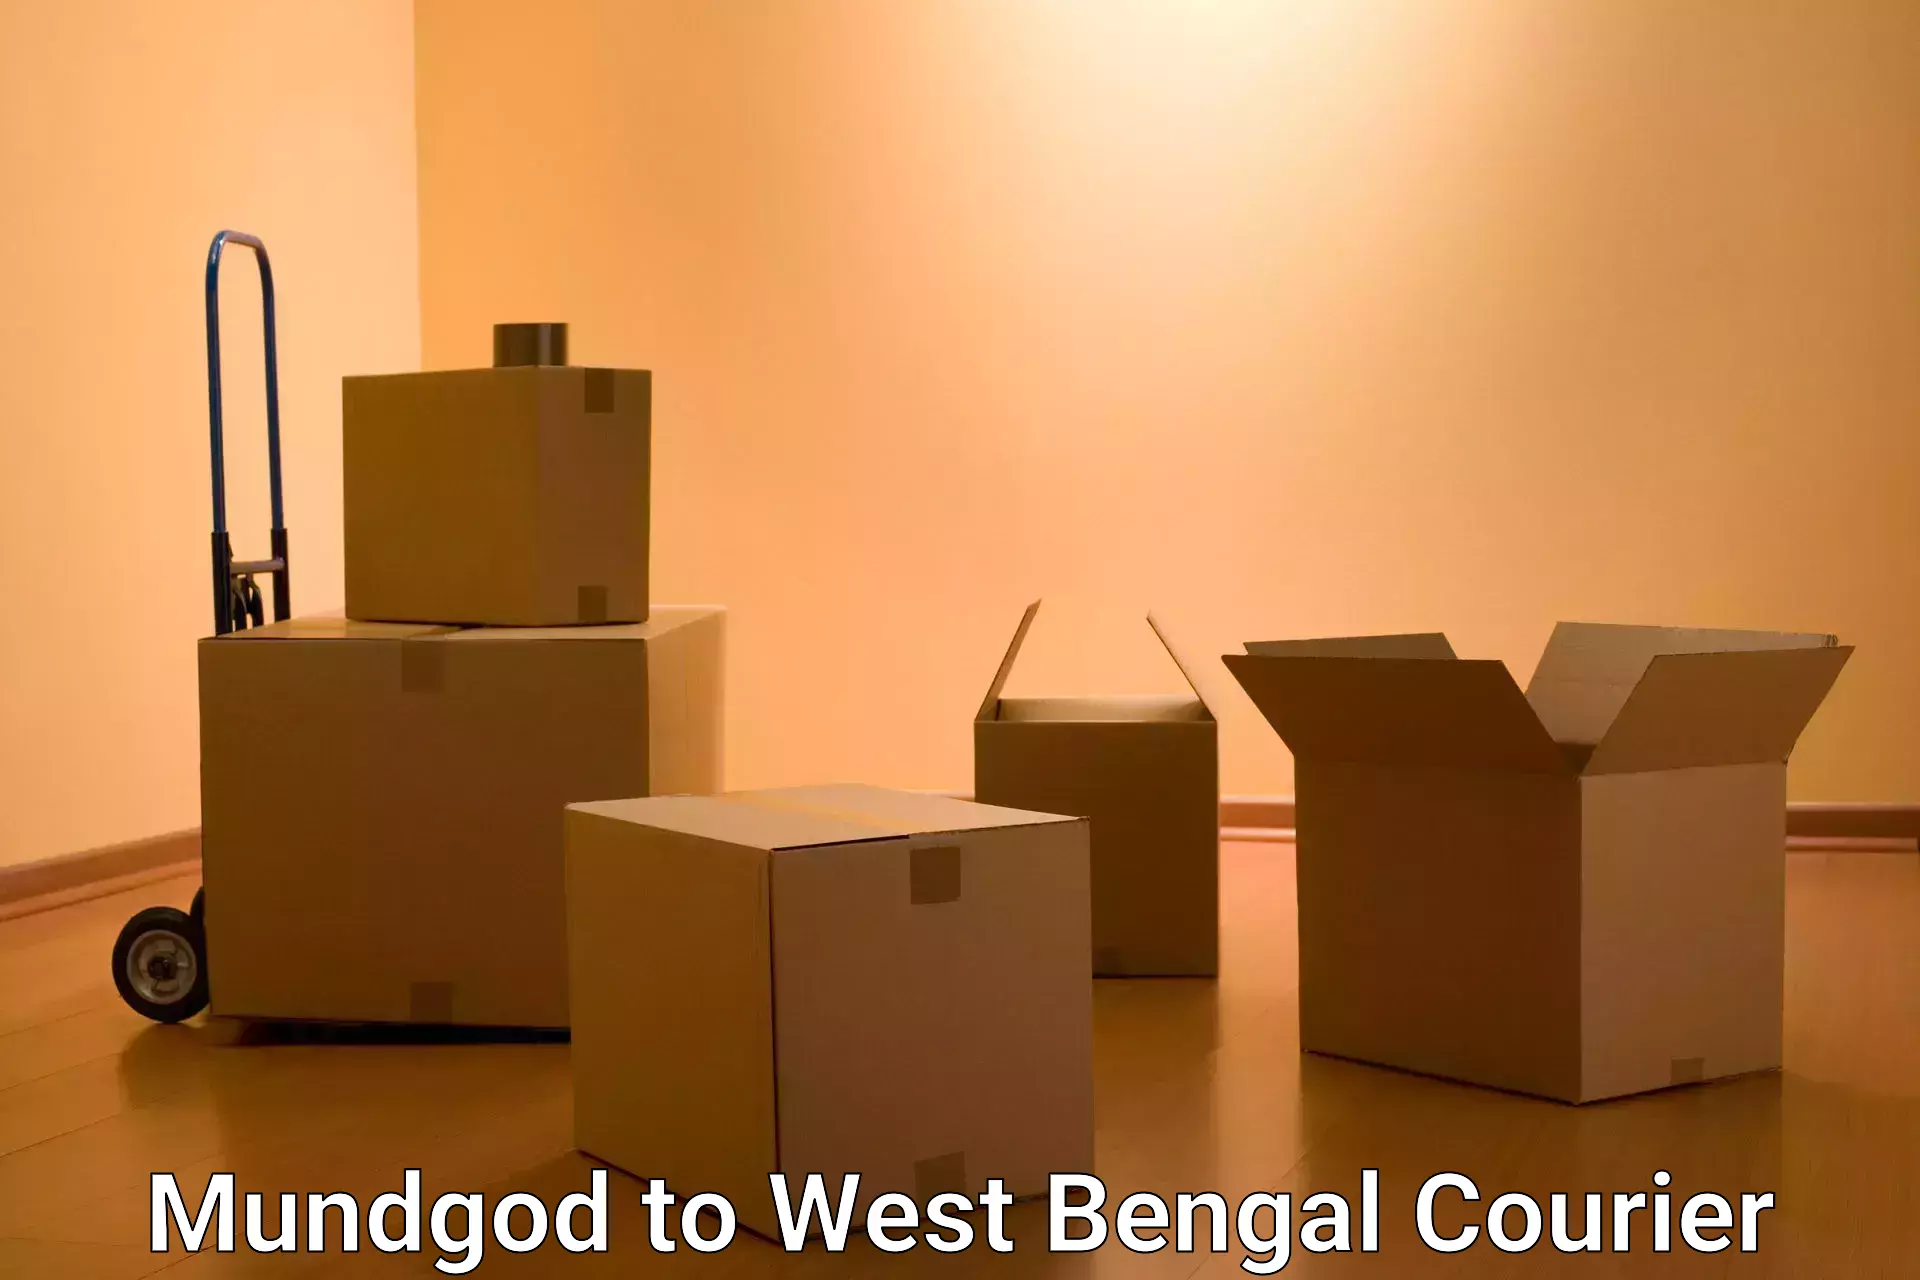 State-of-the-art courier technology Mundgod to West Bengal